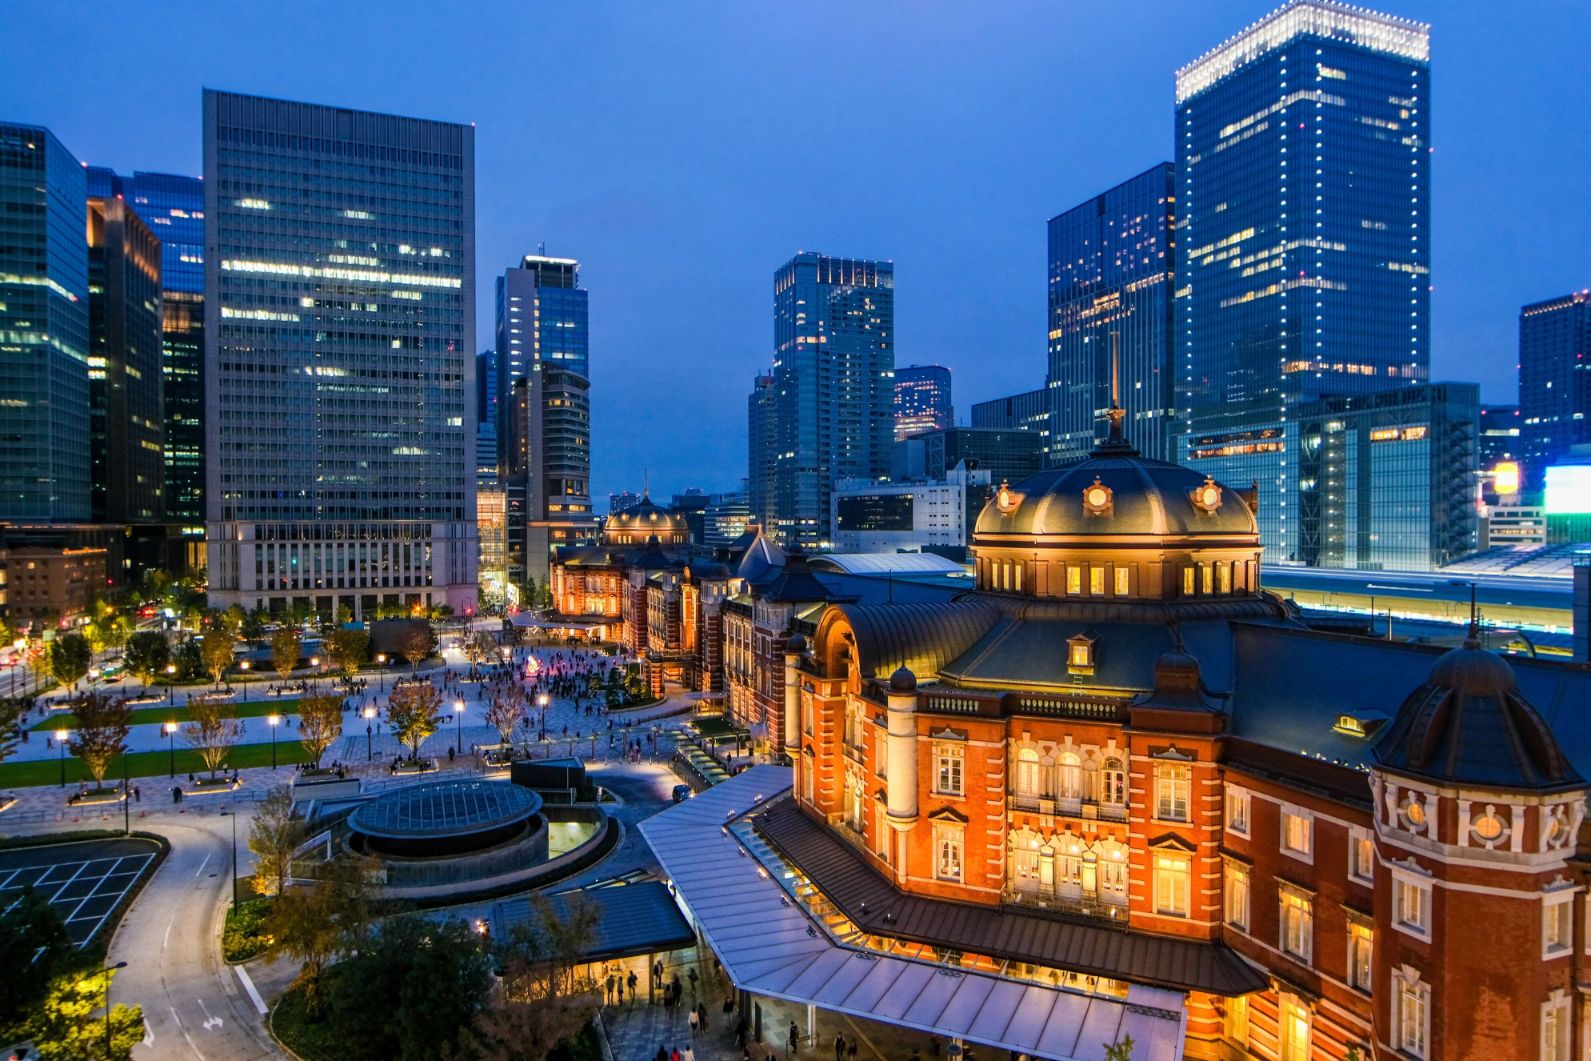 5 Photography Spots in Tokyo Station instagram picture guide book for photography in tokyo location